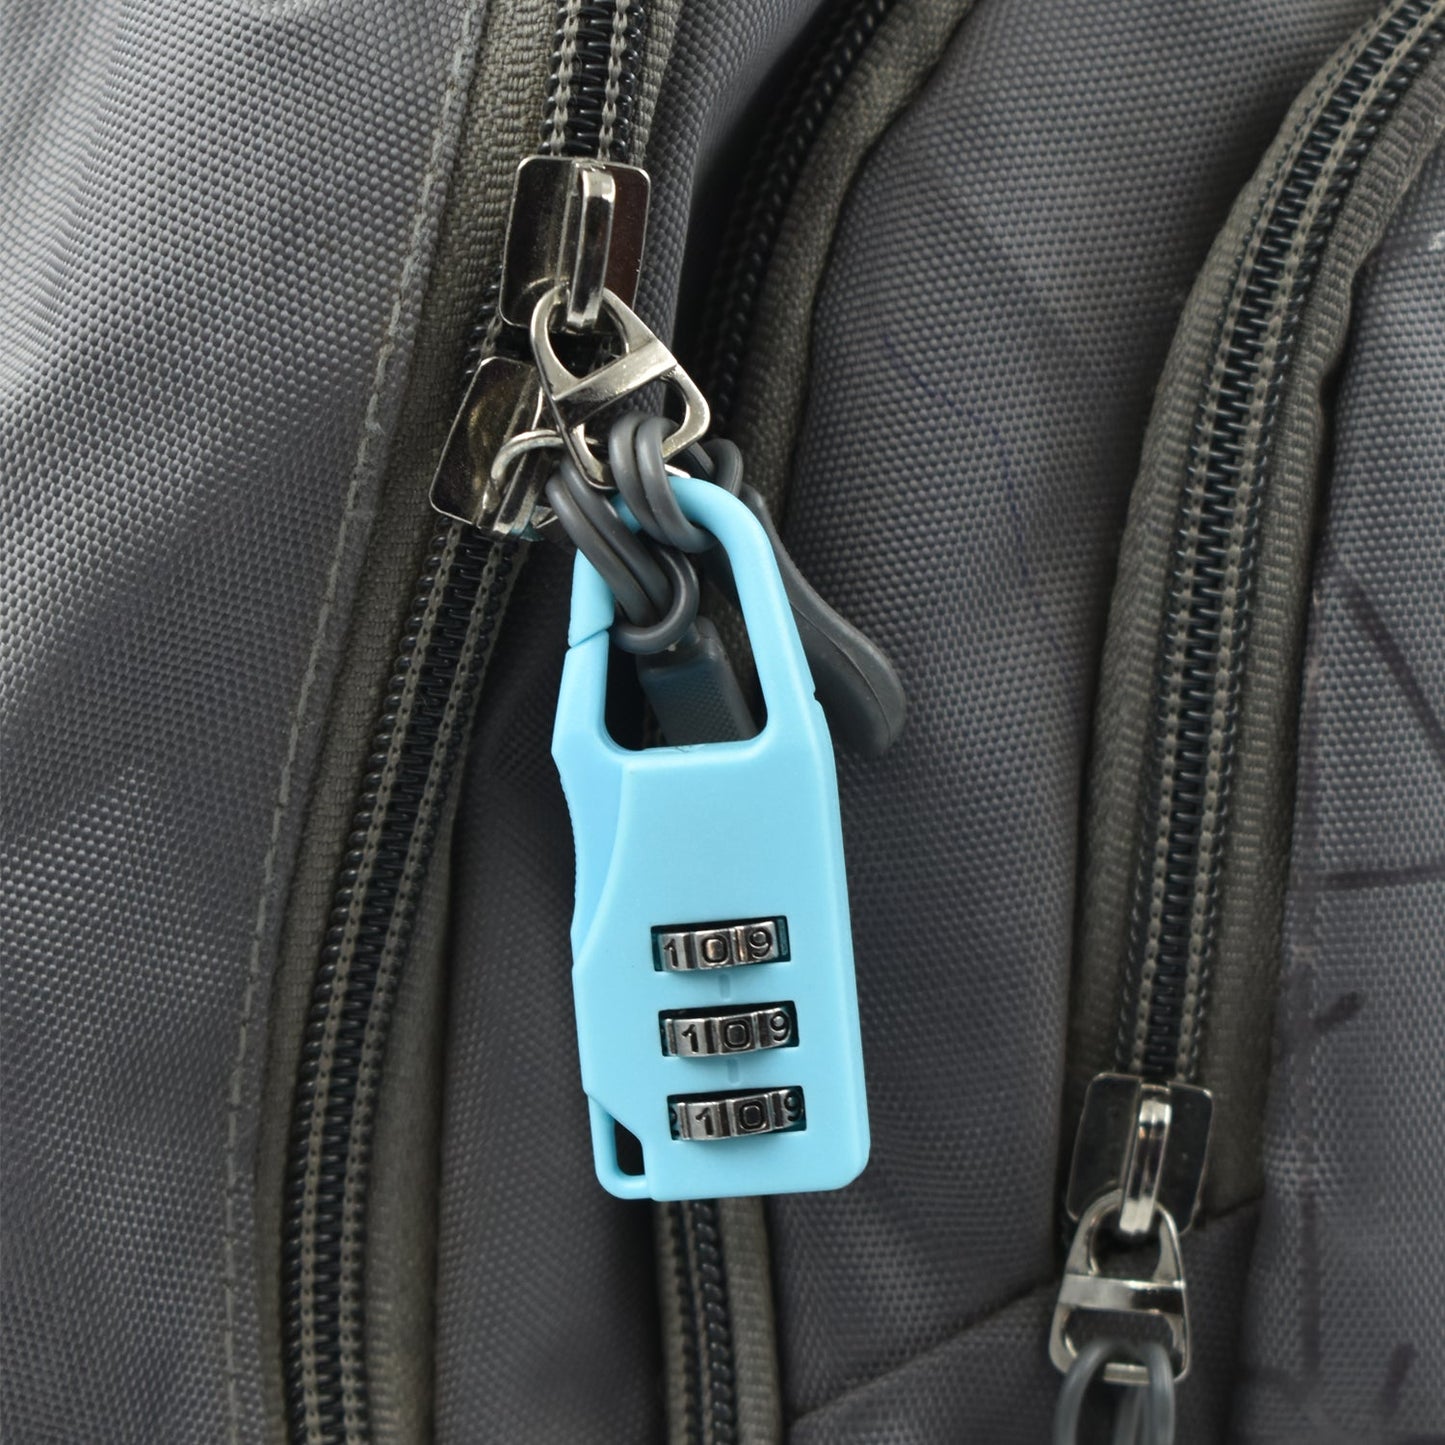 6109 3 Digit luggage Lock and tool used widely in all security purposes of luggage items and materials.